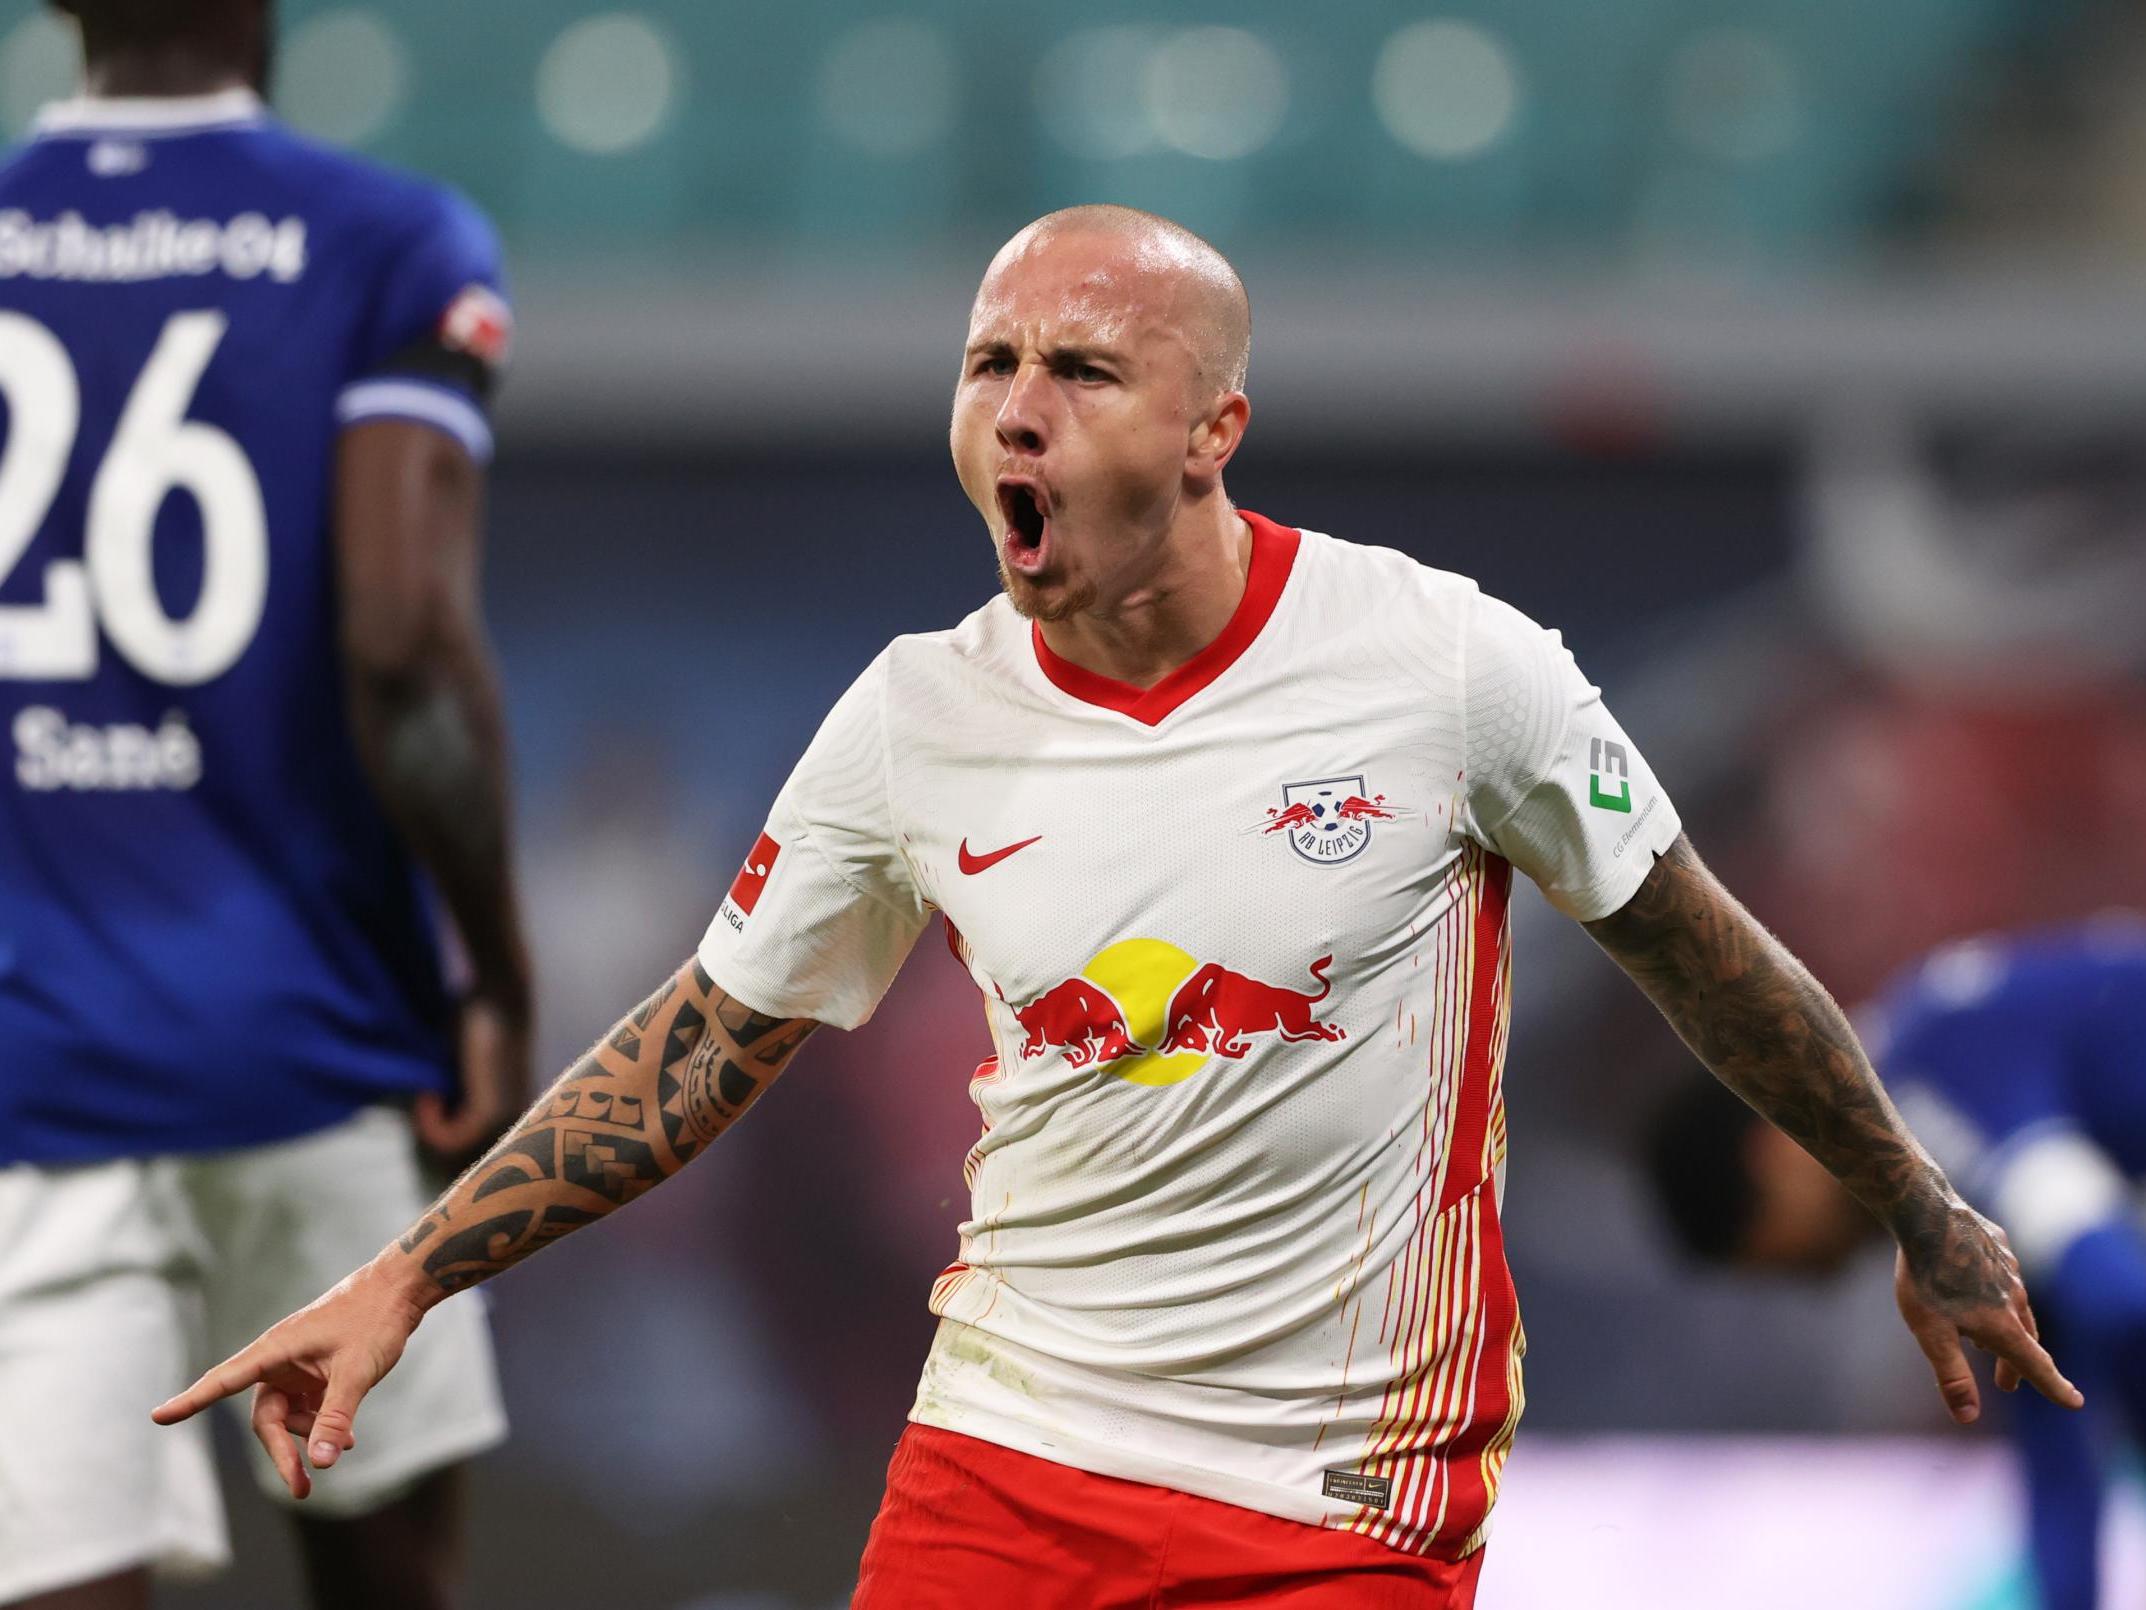 RB Leipzig full-back has thrived since leaving Manchester City